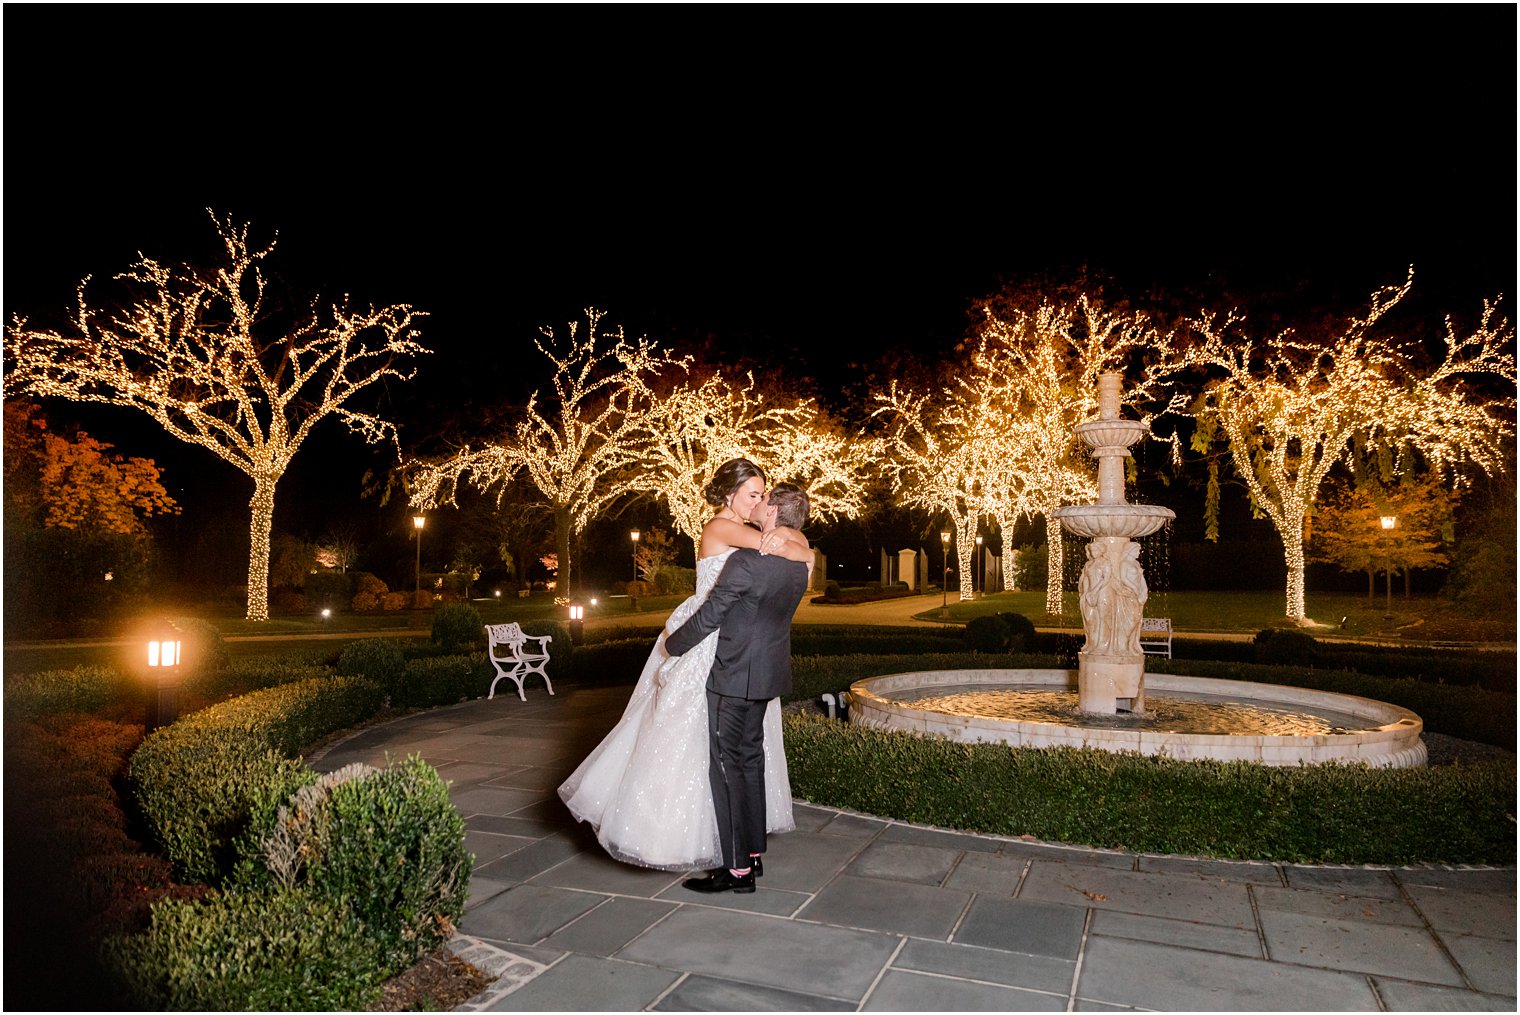 groom lifts bride up outside Park Chateau Estate with fountain and trees with holiday lights